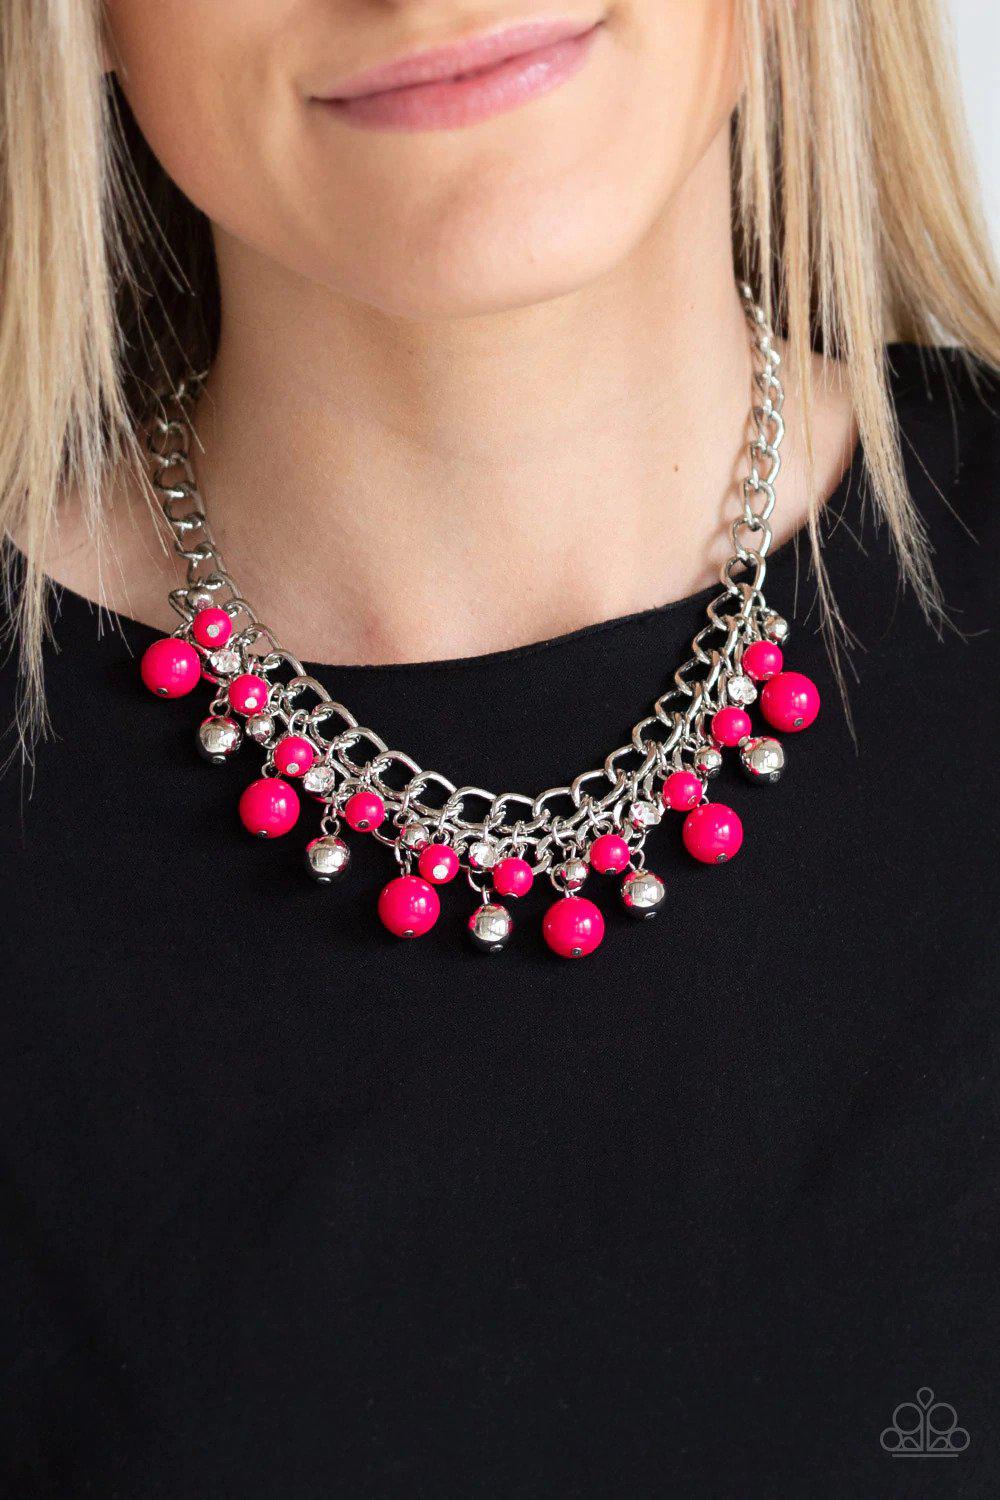 The Bride To BEAD Pink Necklace - Paparazzi Accessories- on model - CarasShop.com - $5 Jewelry by Cara Jewels